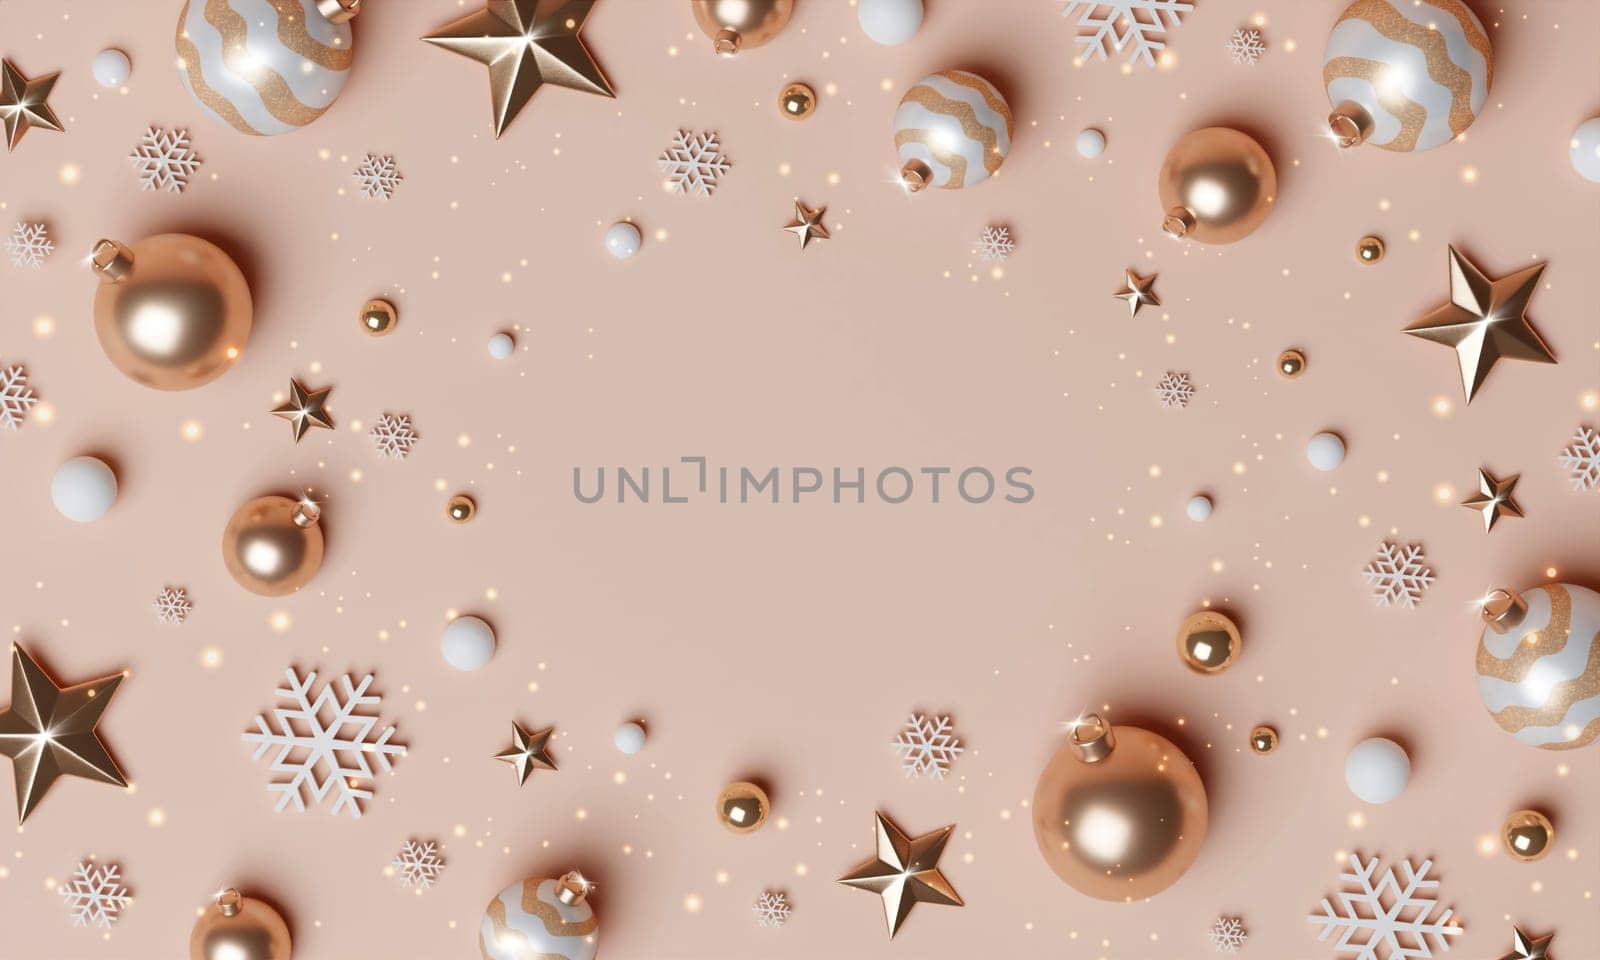 3d Christmas Abstract wallpaper. Realistic . Decorative festive elements glass bauble balls. Xmas holiday template podium. by meepiangraphic